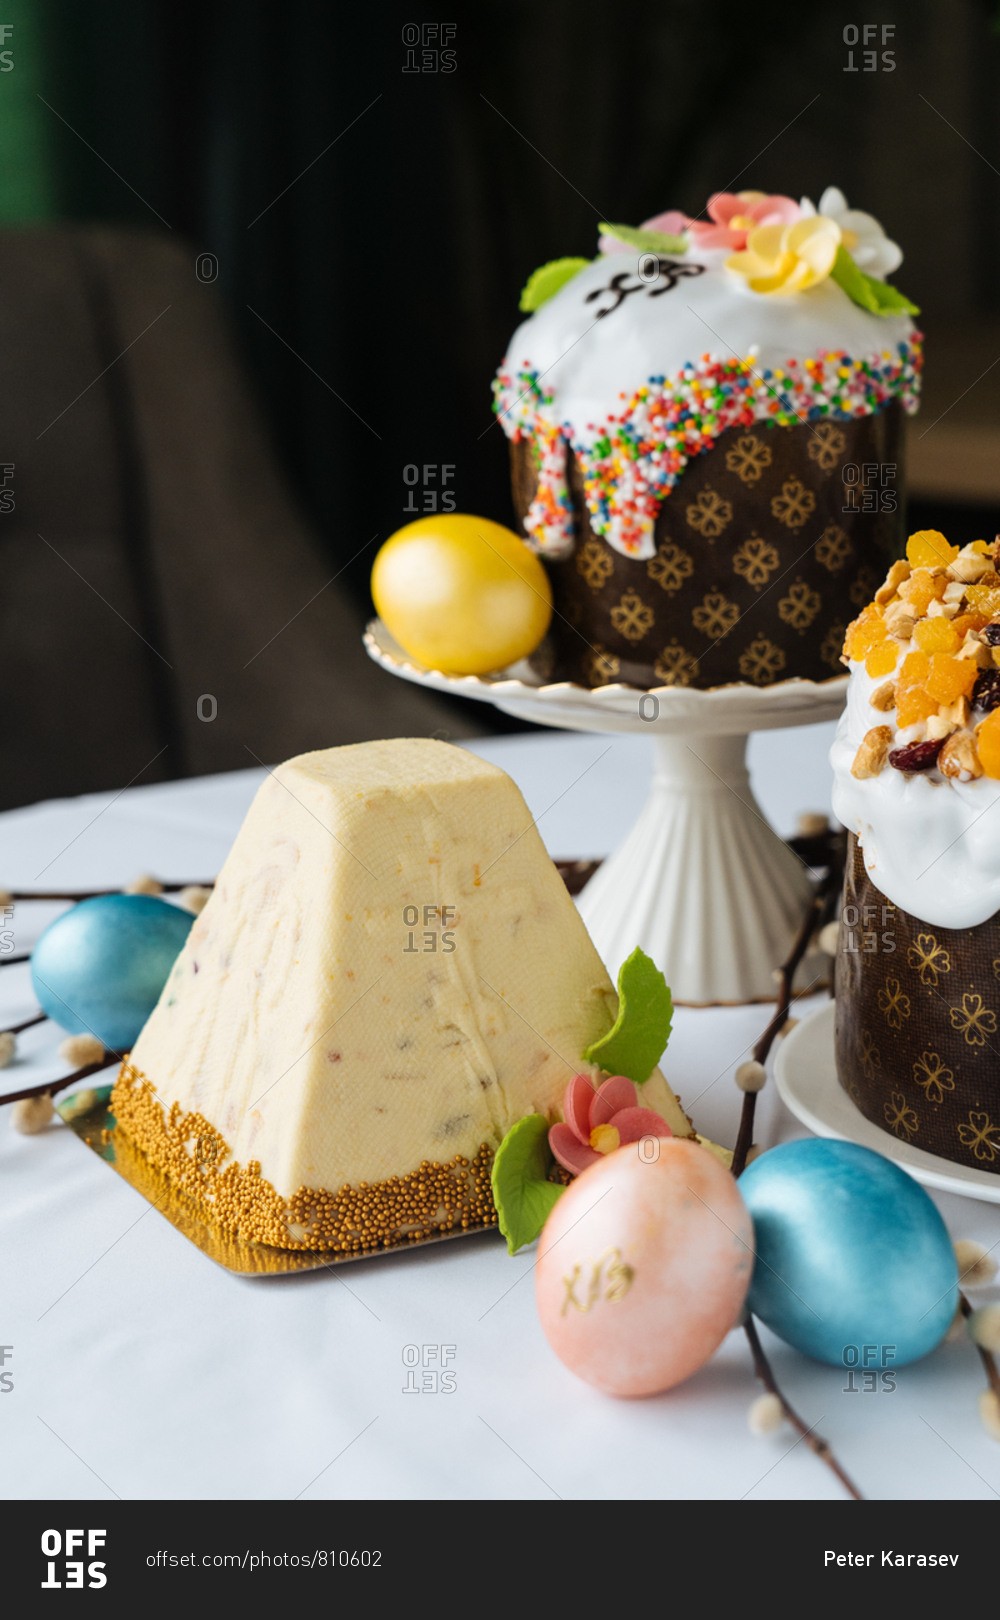 Gourmet pyramid shaped cake and Easter eggs